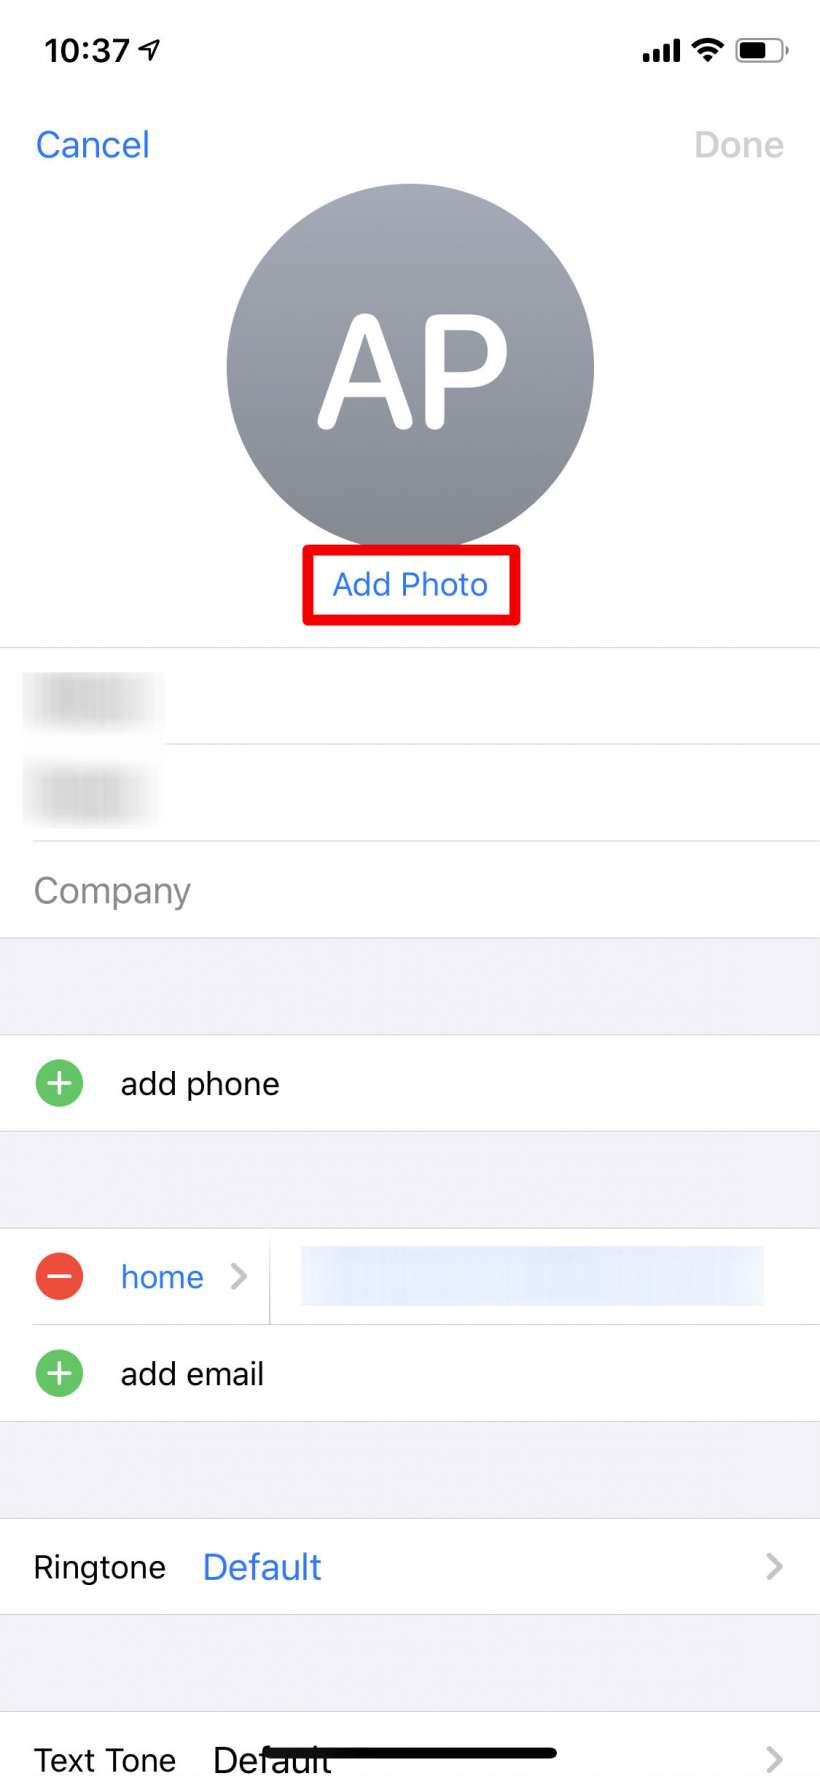 How to set Animoji and Memoji as profile photos for your friends contacts on iPhone and iPad.